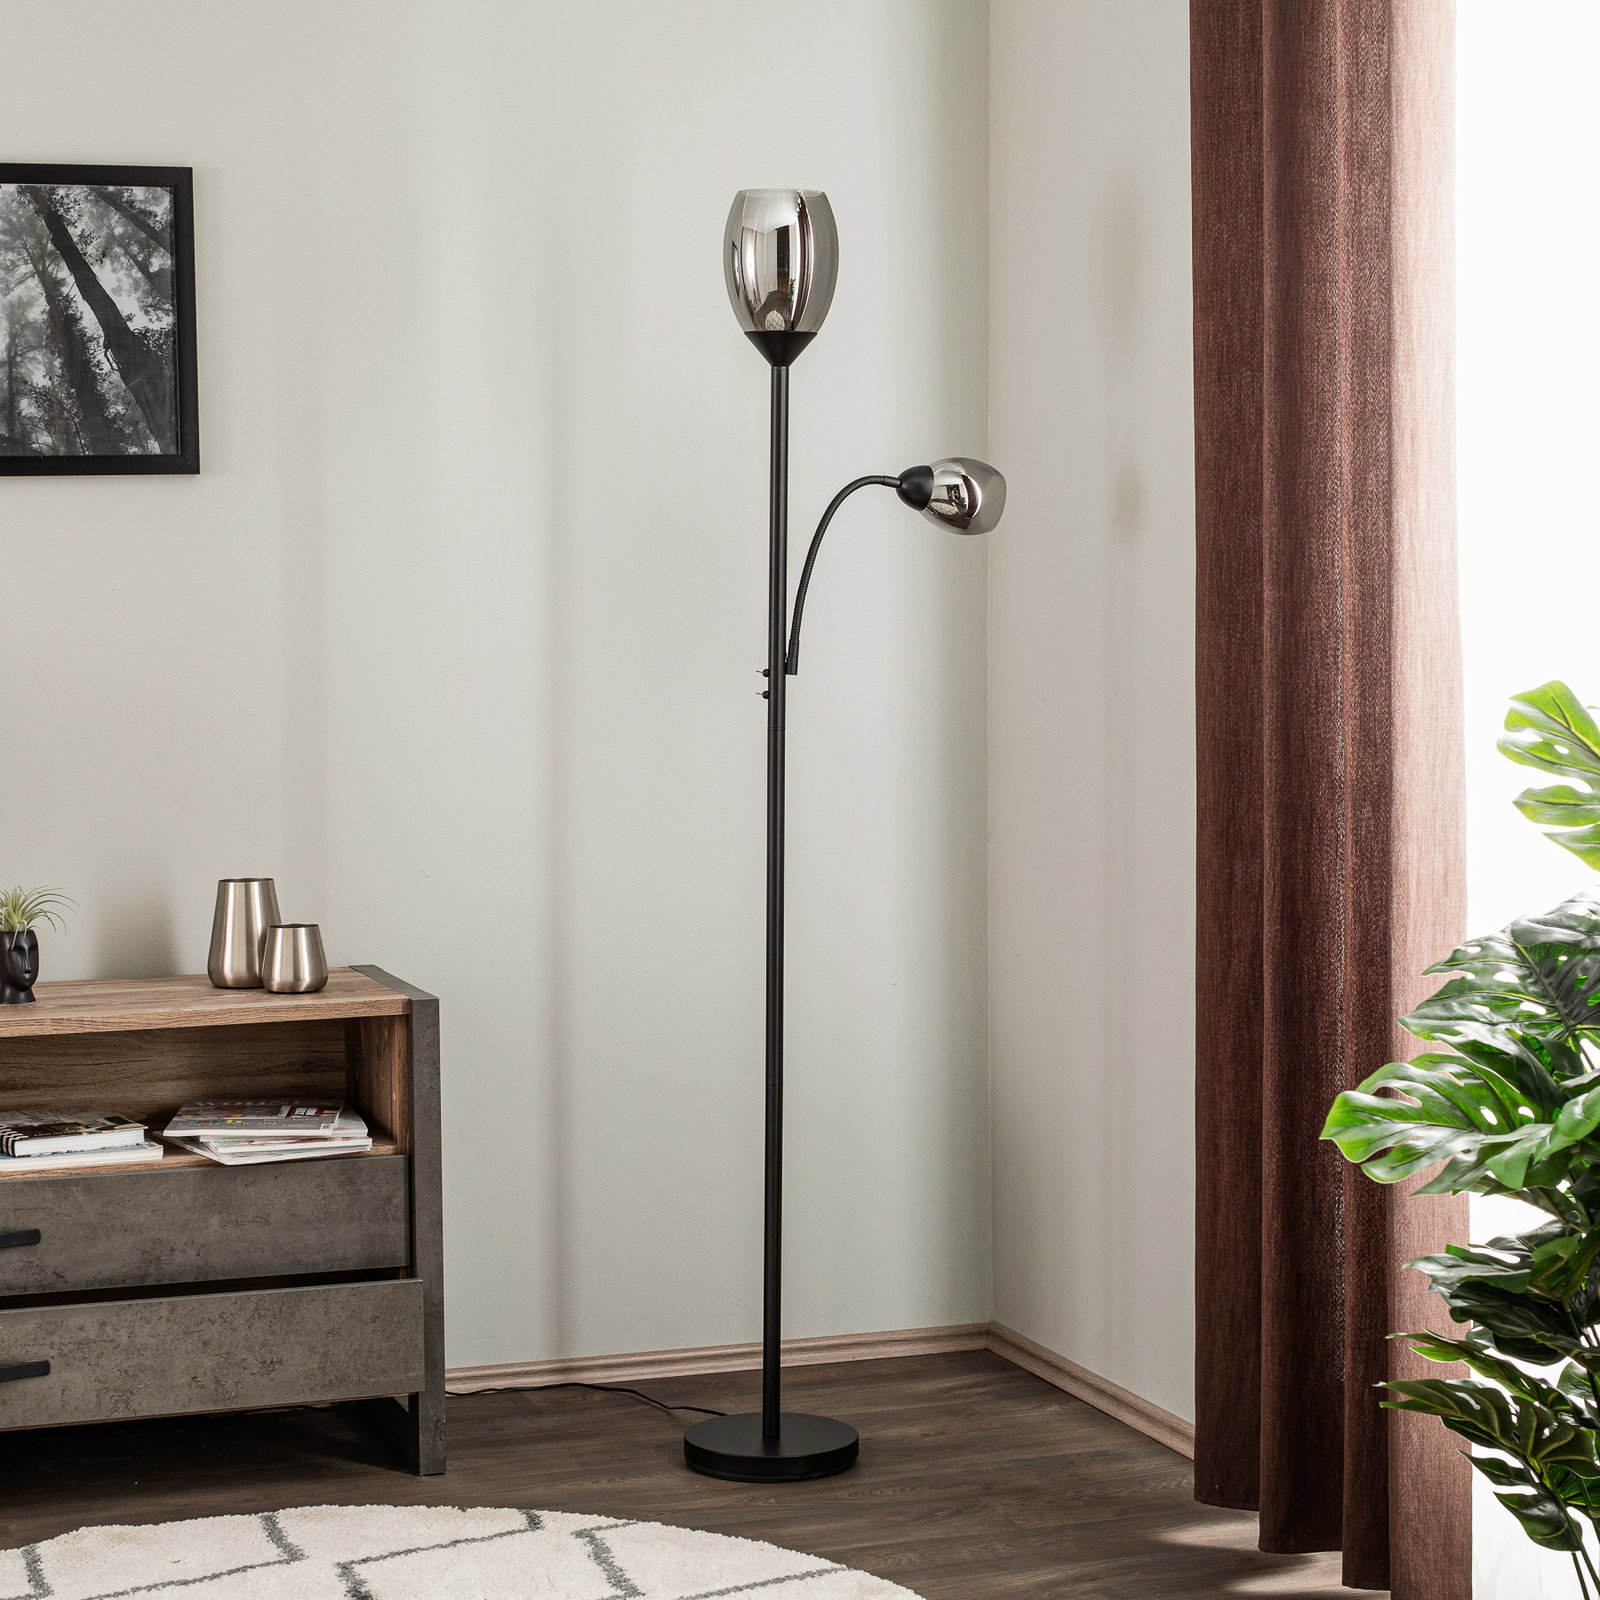 Lindby Irmino floor lamp with smoked glass shades